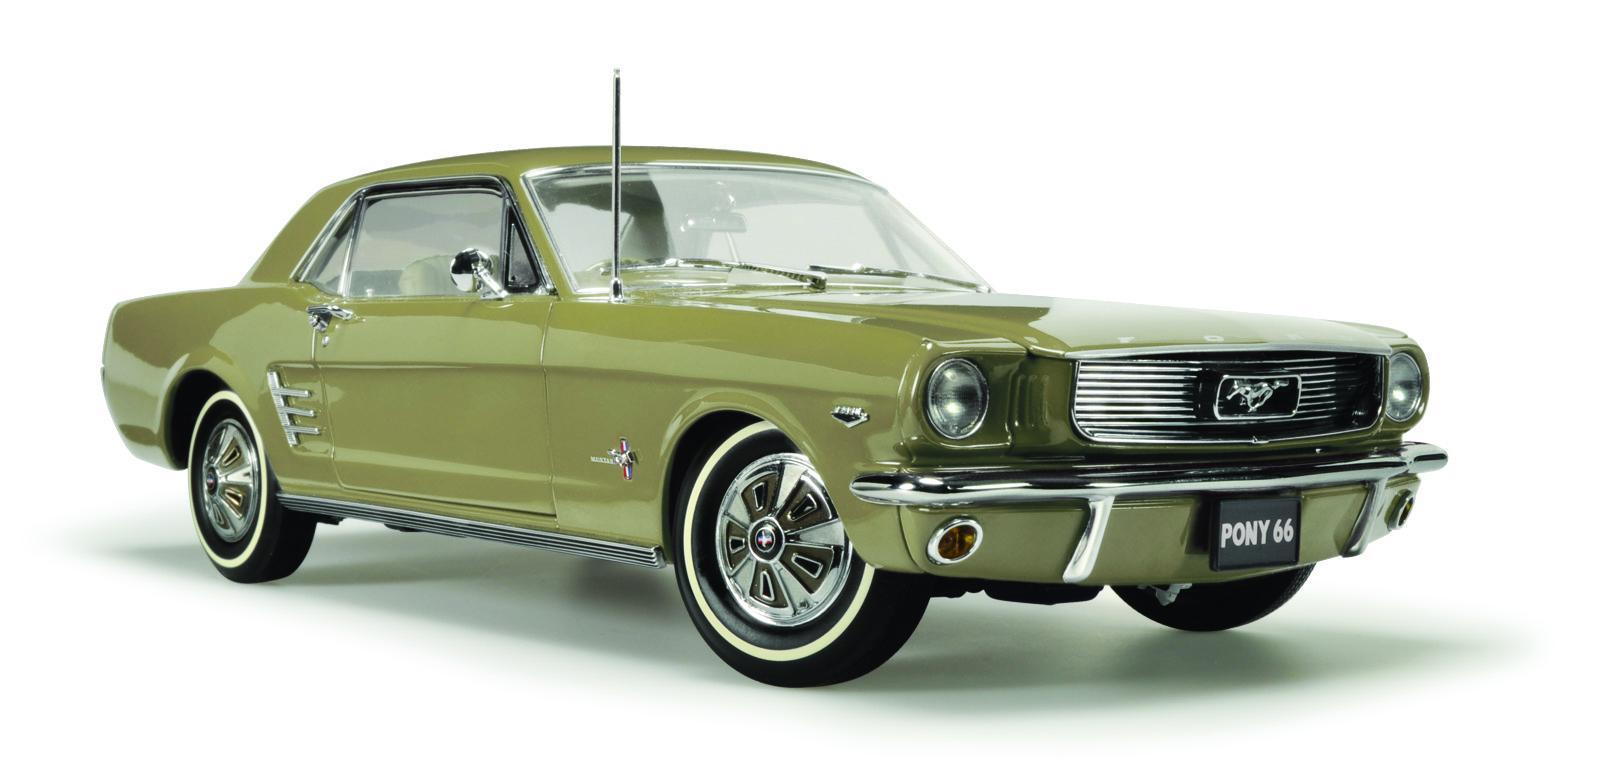 1966 Pony Mustang Sauterne Gold Celebrating The 50th Anniversary Of The Ford Mustang 1:18 Scale Die Cast Model Car (FULL PRICE $259.00)